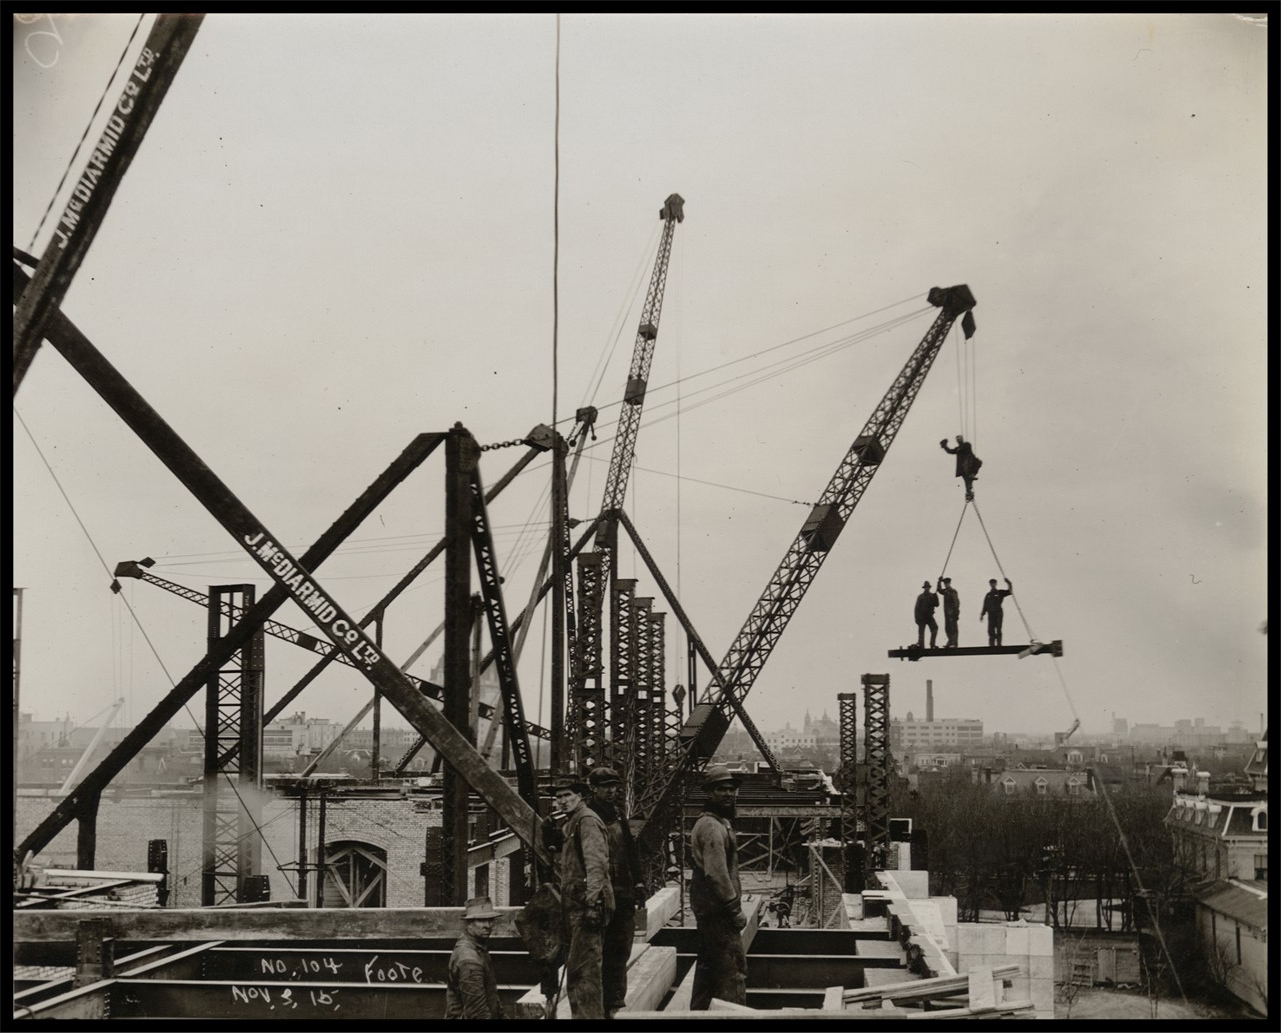 Photo of large cranes reaching up to the sky. Several men stand on the incomplete roof. Three men wave while standing on a beam suspended in mid-air, while another hangs onto the cable above them.